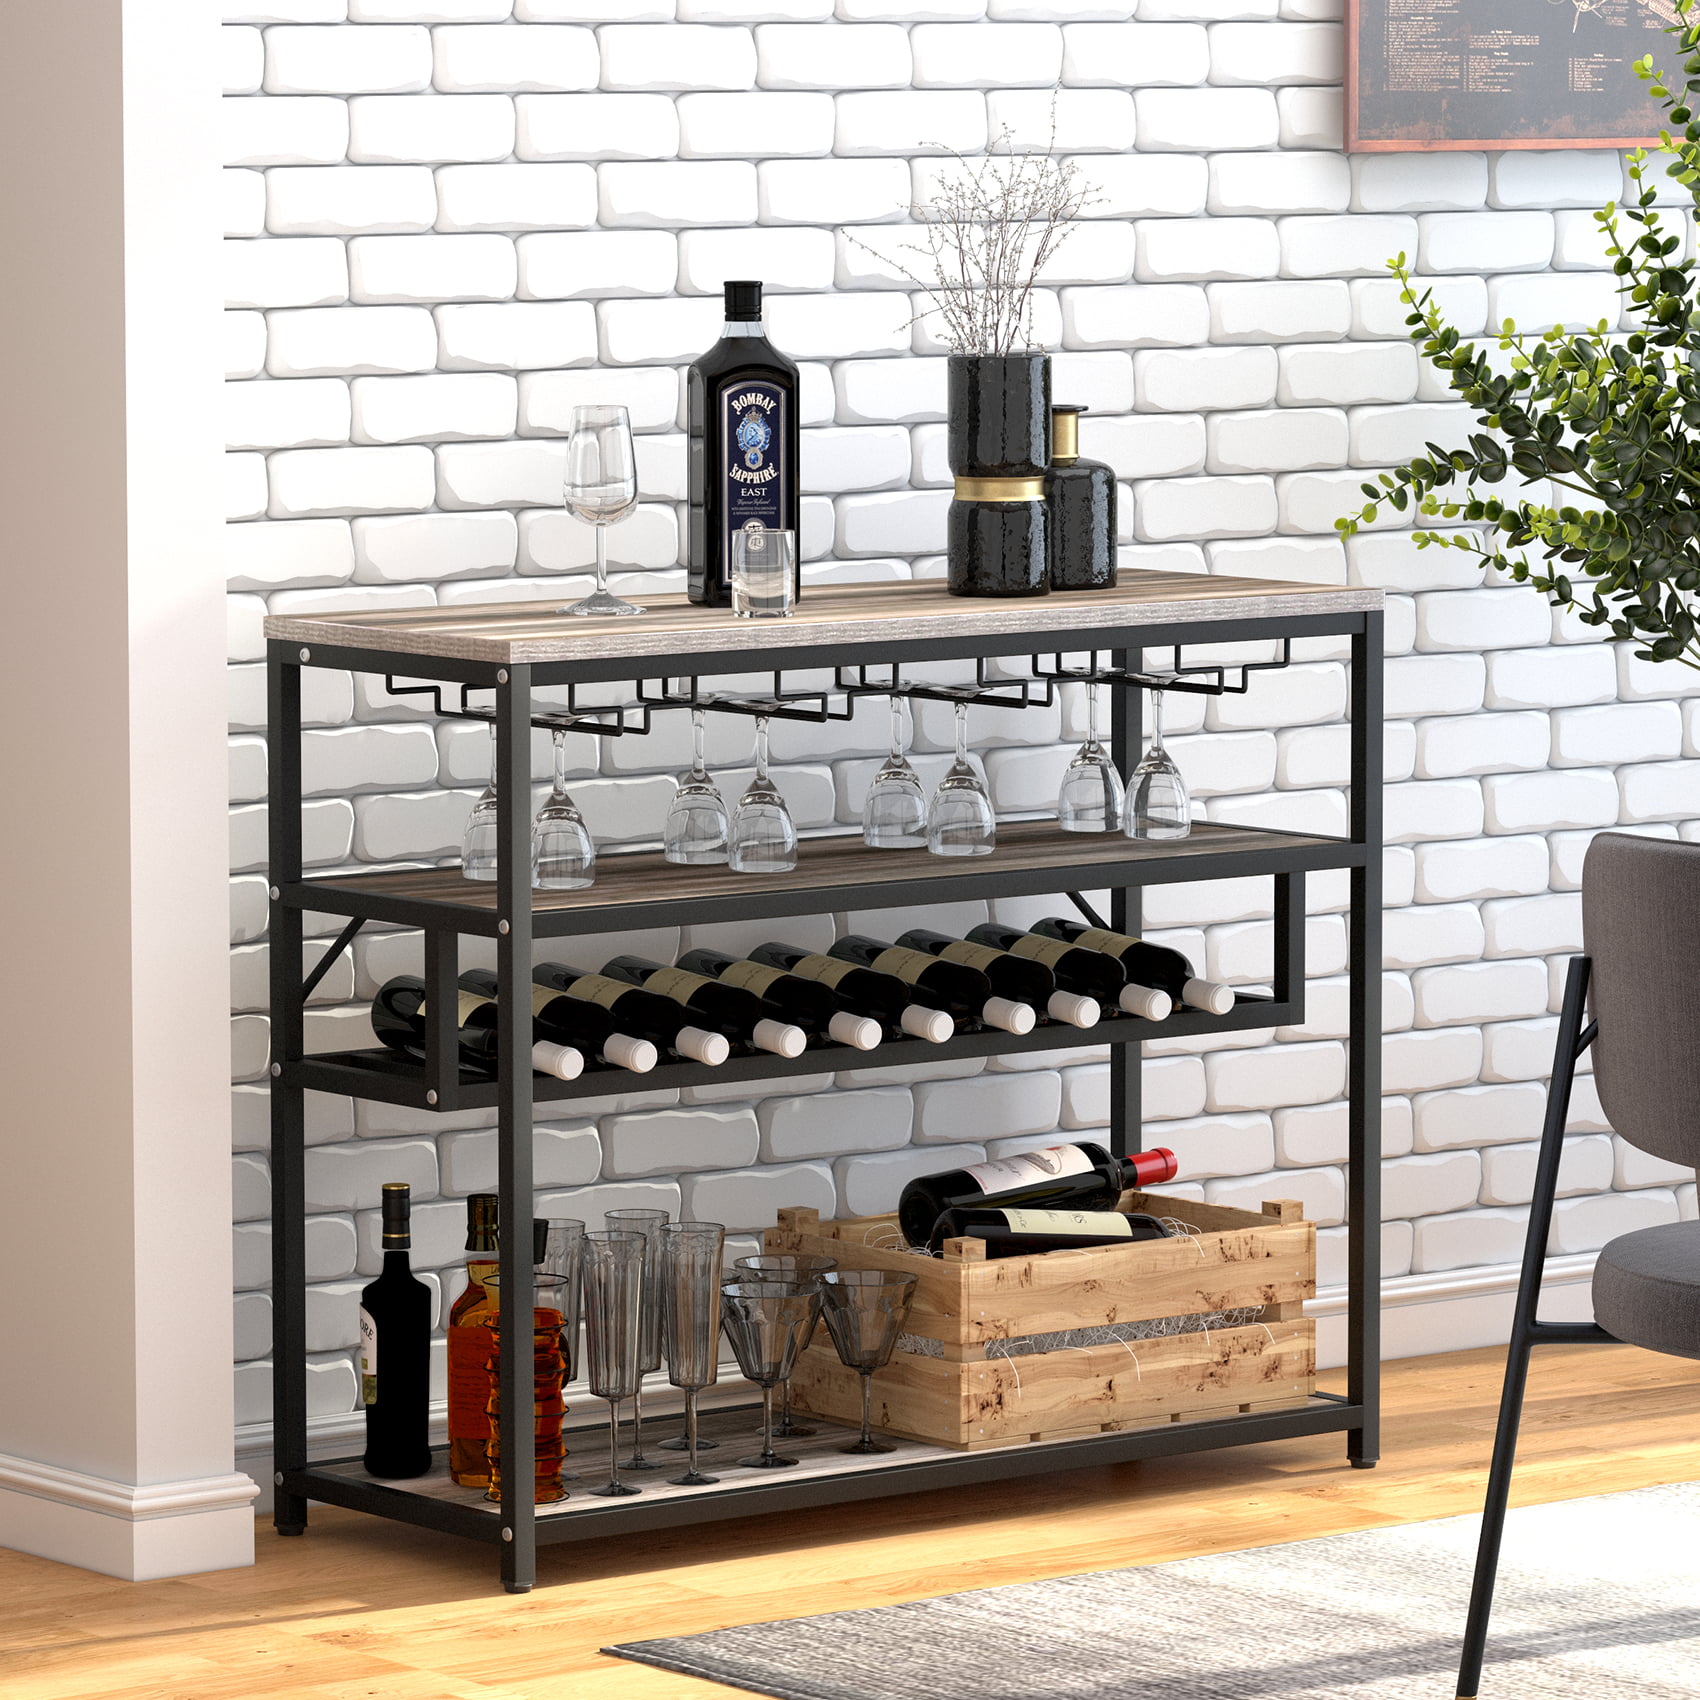 18 Bottle Stackable Wine Rack Kit Countertop Display Dining Home Kitchen Decor 